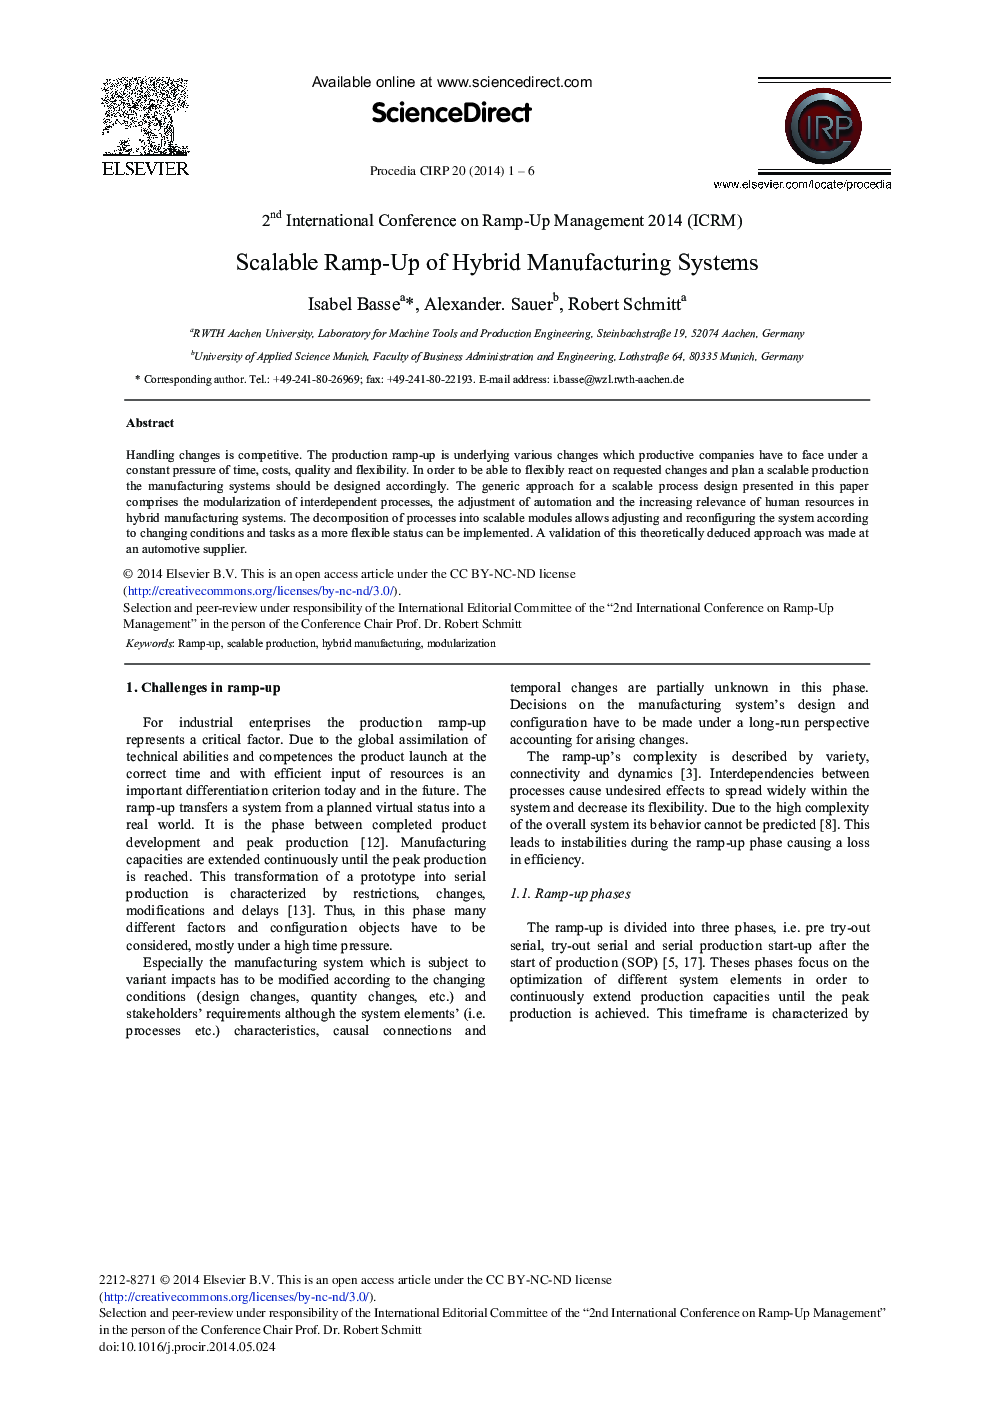 Scalable Ramp-up of Hybrid Manufacturing Systems 